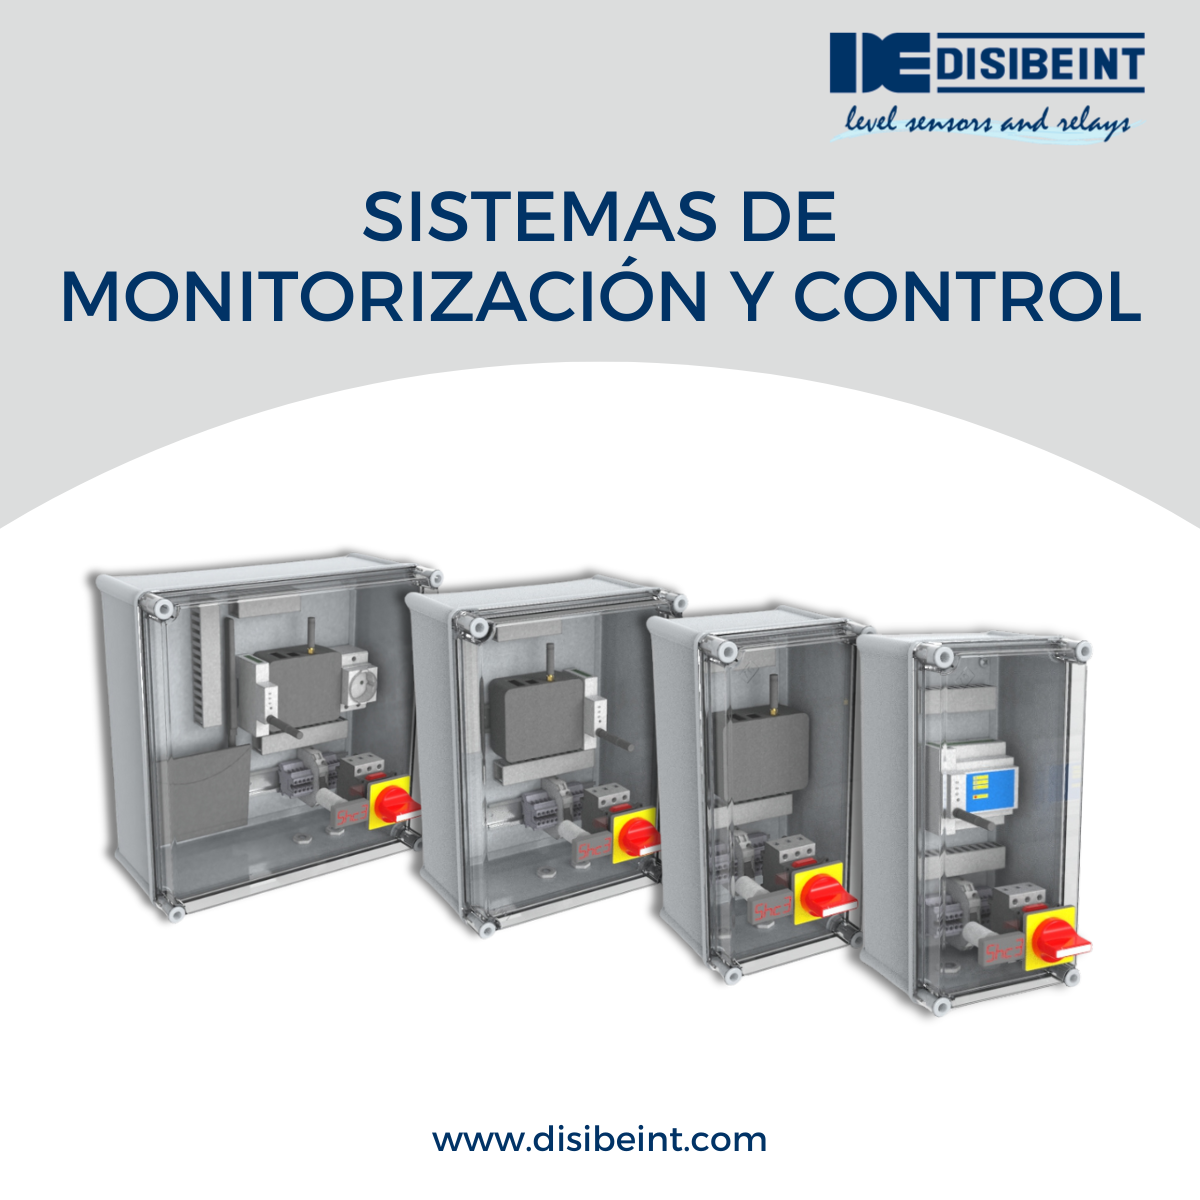 New section: Monitoring and control systems